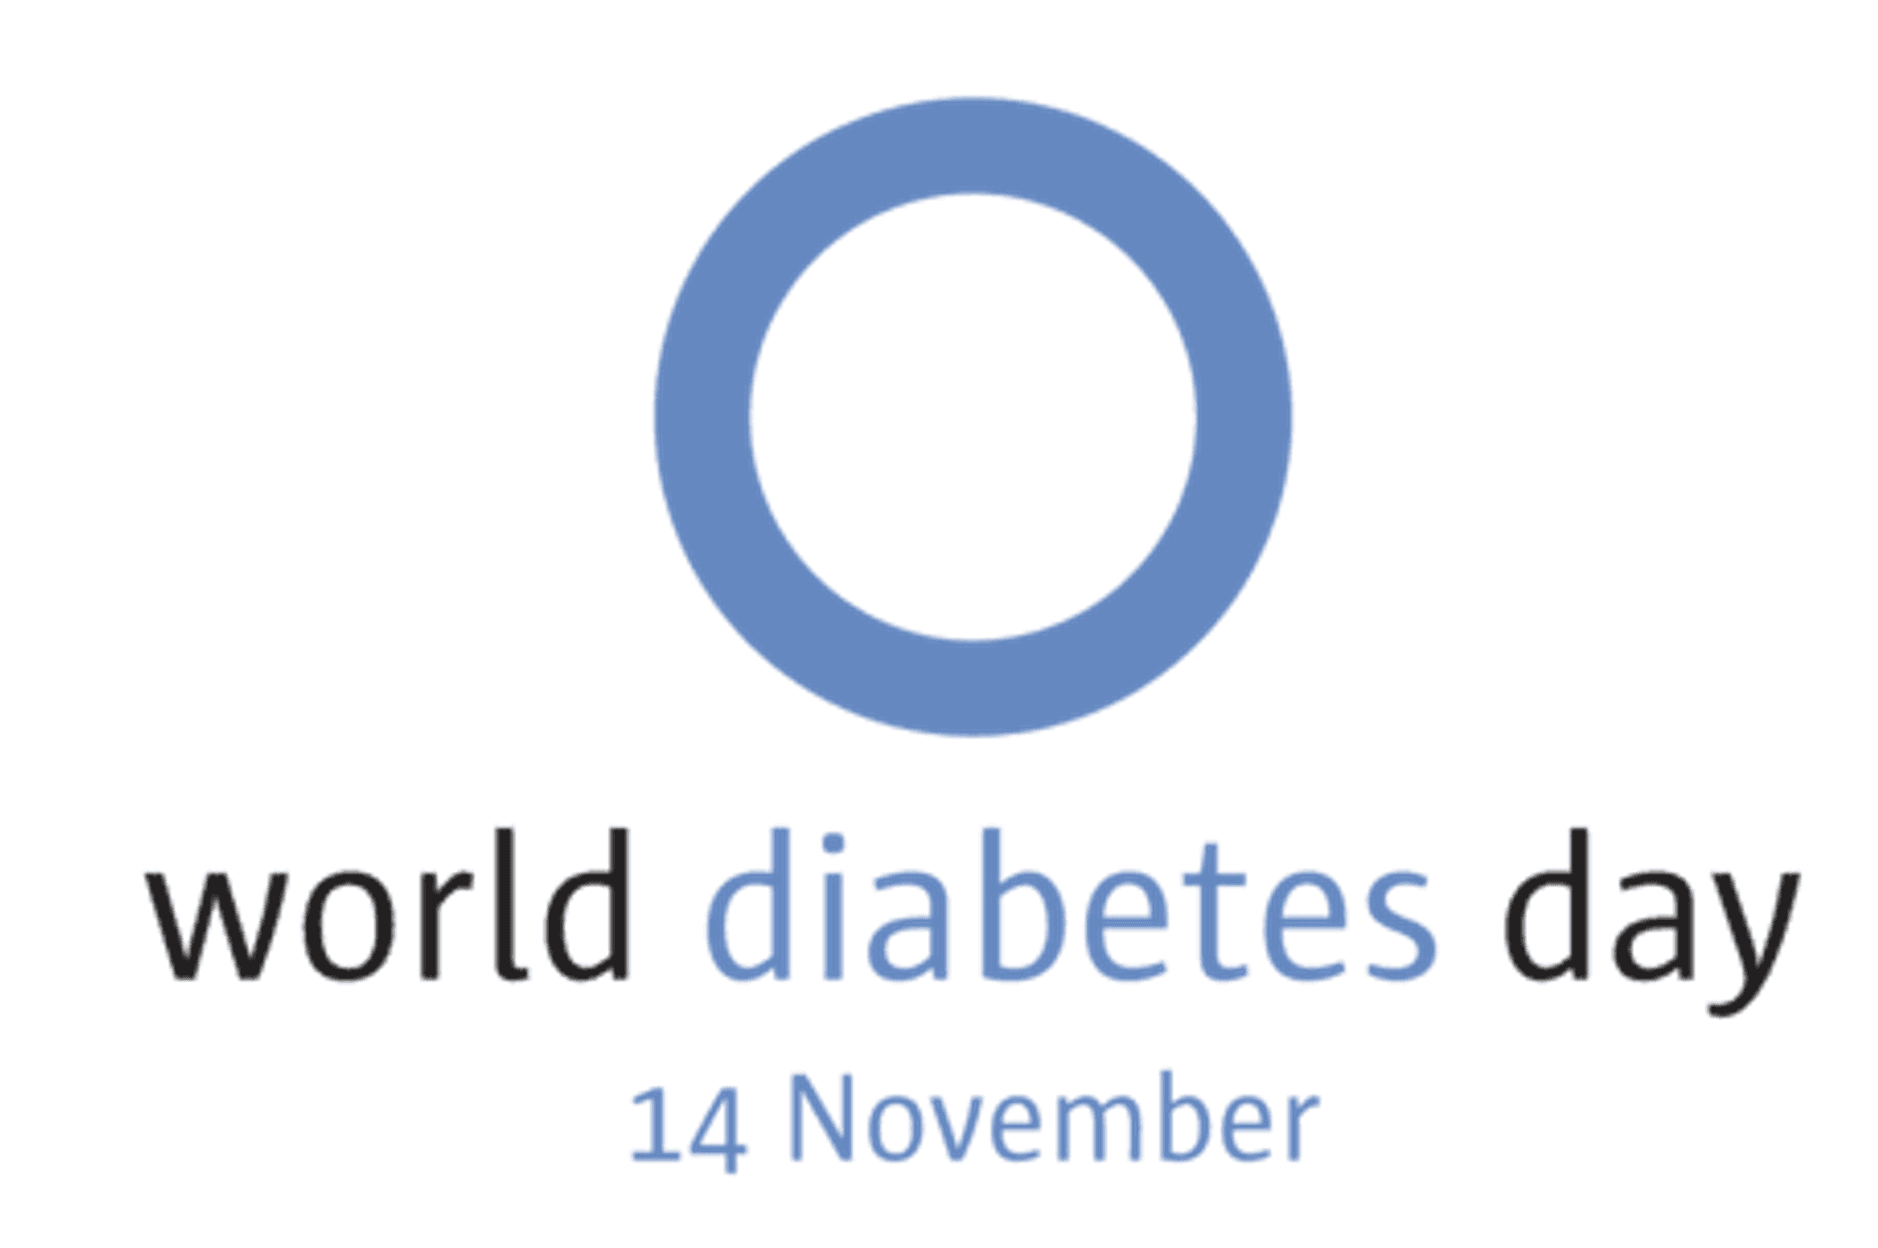 A T1D Message on World Diabetes Day